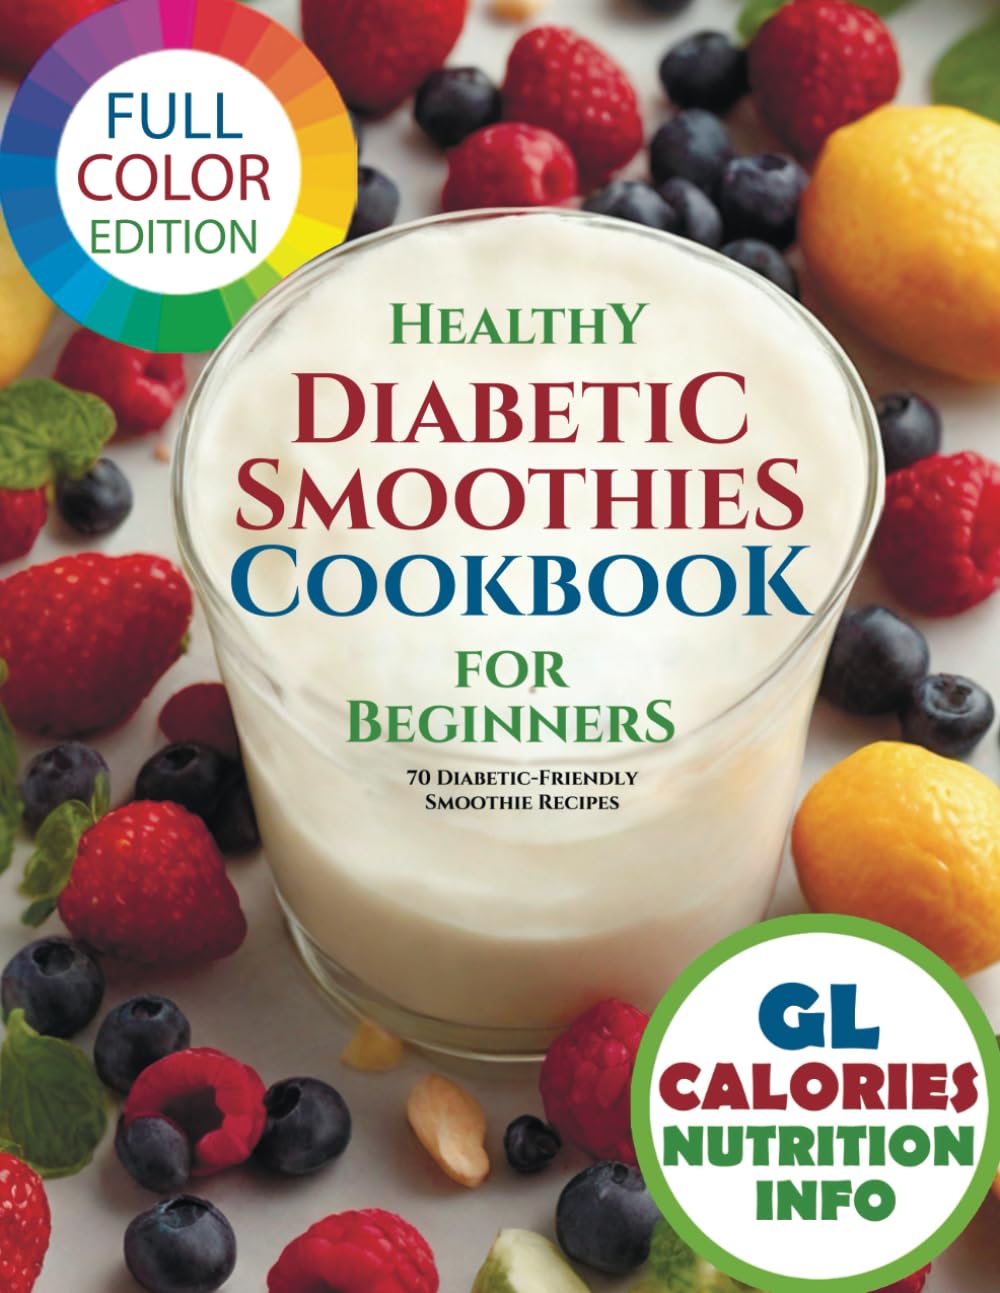 Healthy Diabetic Smoothies Cookbook for Beginners: 70 Diabetic-Friendly Colorful Recipe Photos with Glycemic Index (GL), Calorie, and Nutritional Information